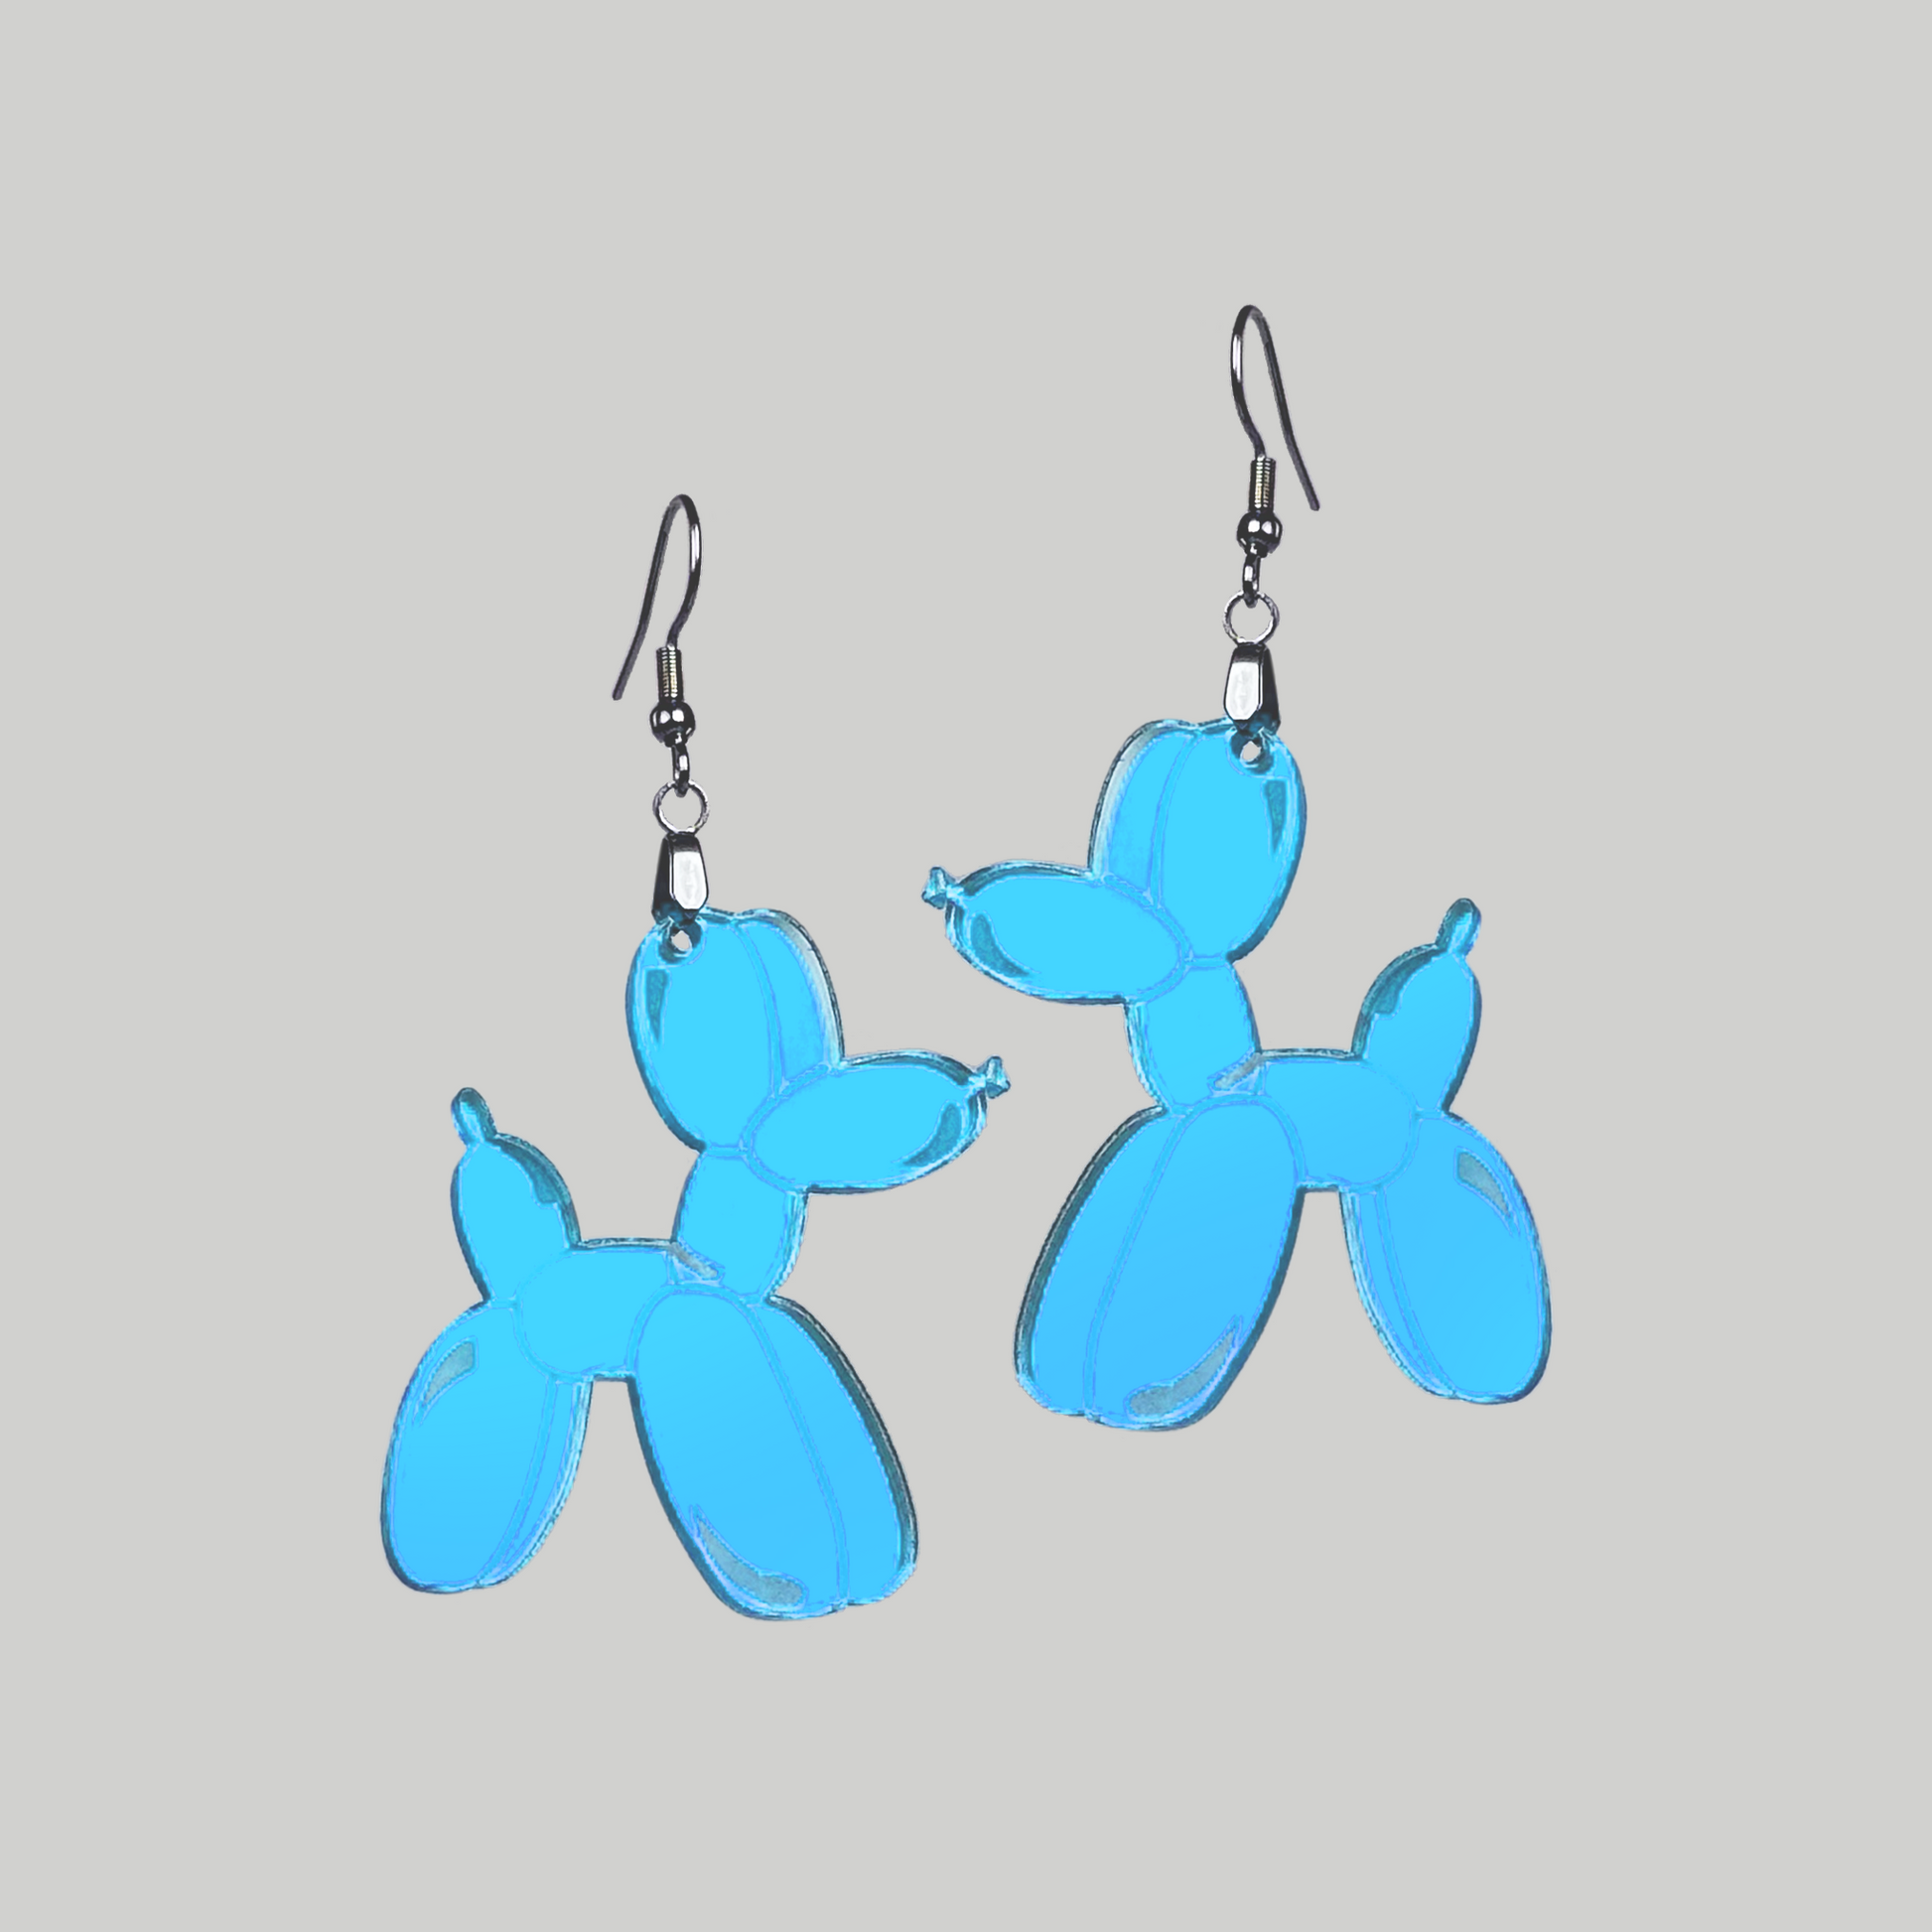 Earrings crafted in the shape of a balloon dog, a lighthearted and unique accessory to bring a smile to your style.